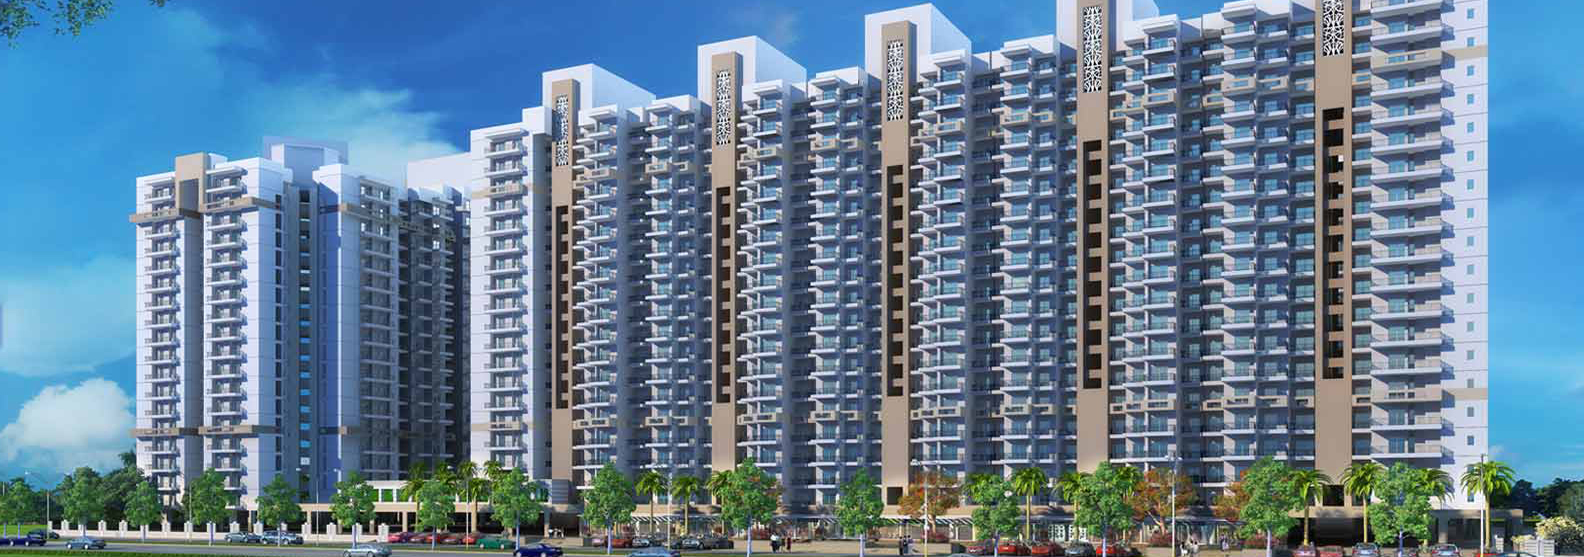 Gulshan Bellina Residential Project